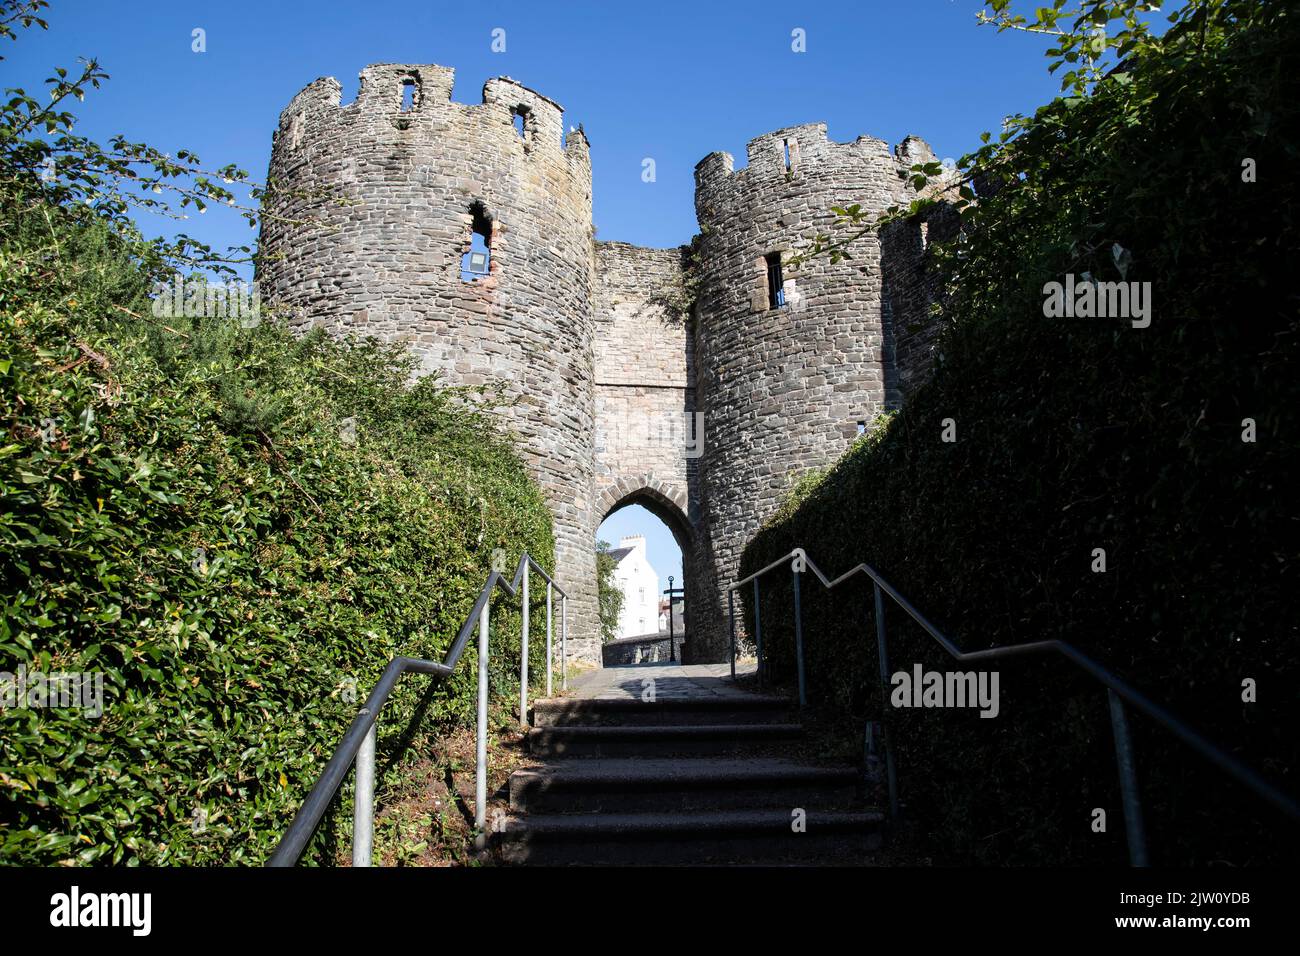 The Mill Gate Towers of Conwy Castle unusually do not form a pair, one being round and the other 'D' shaped providing access to the Royal Watermill Stock Photo